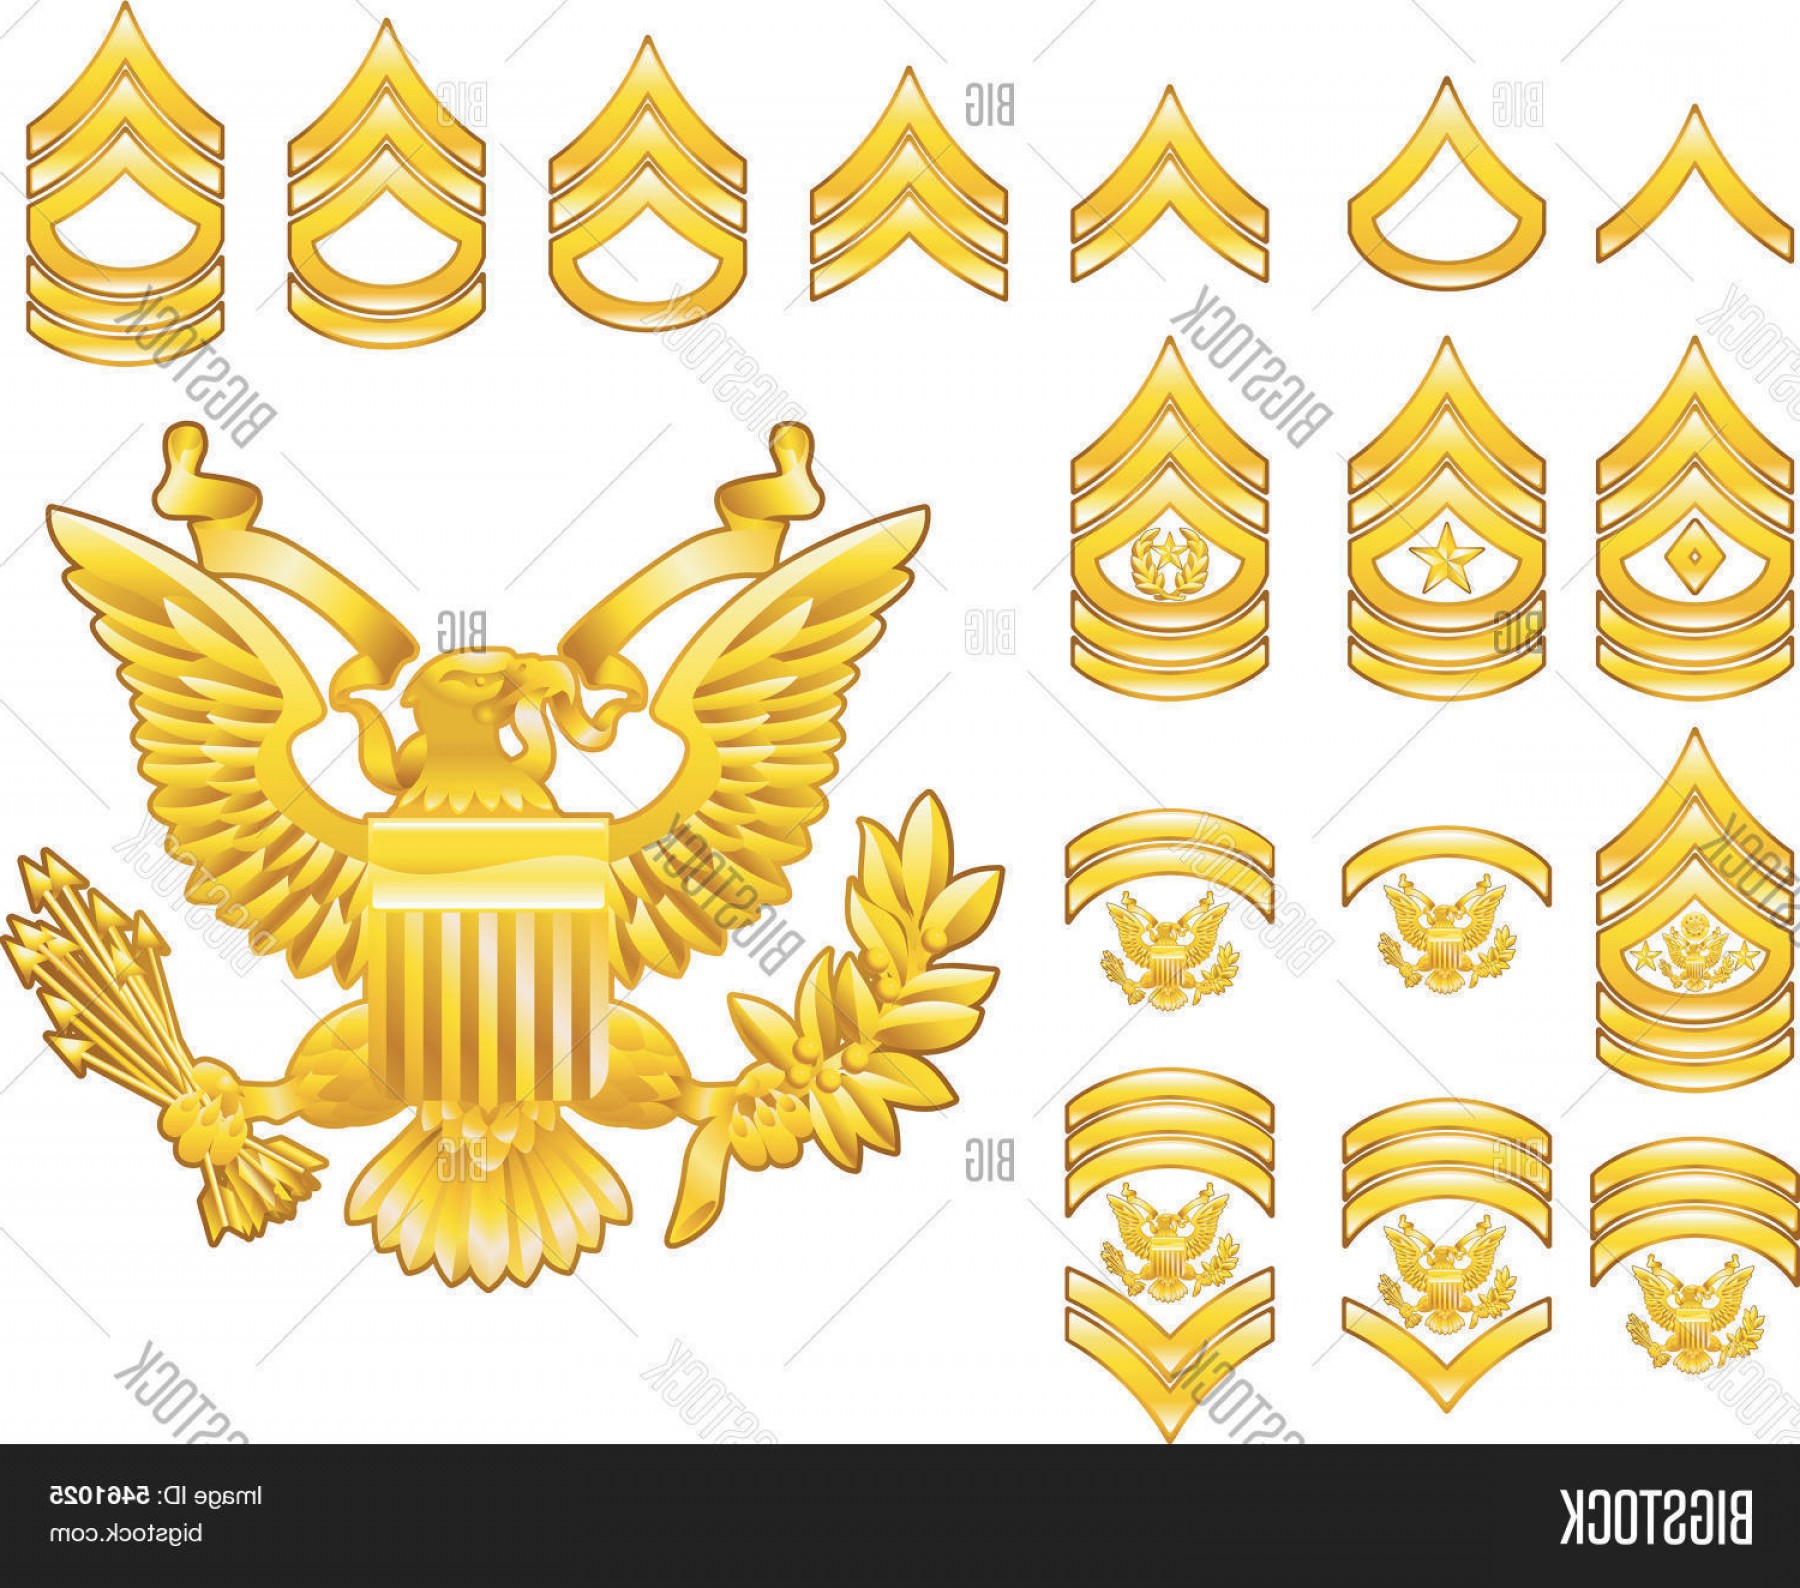 The best free Insignia vector images. Download from 124 free vectors of ...